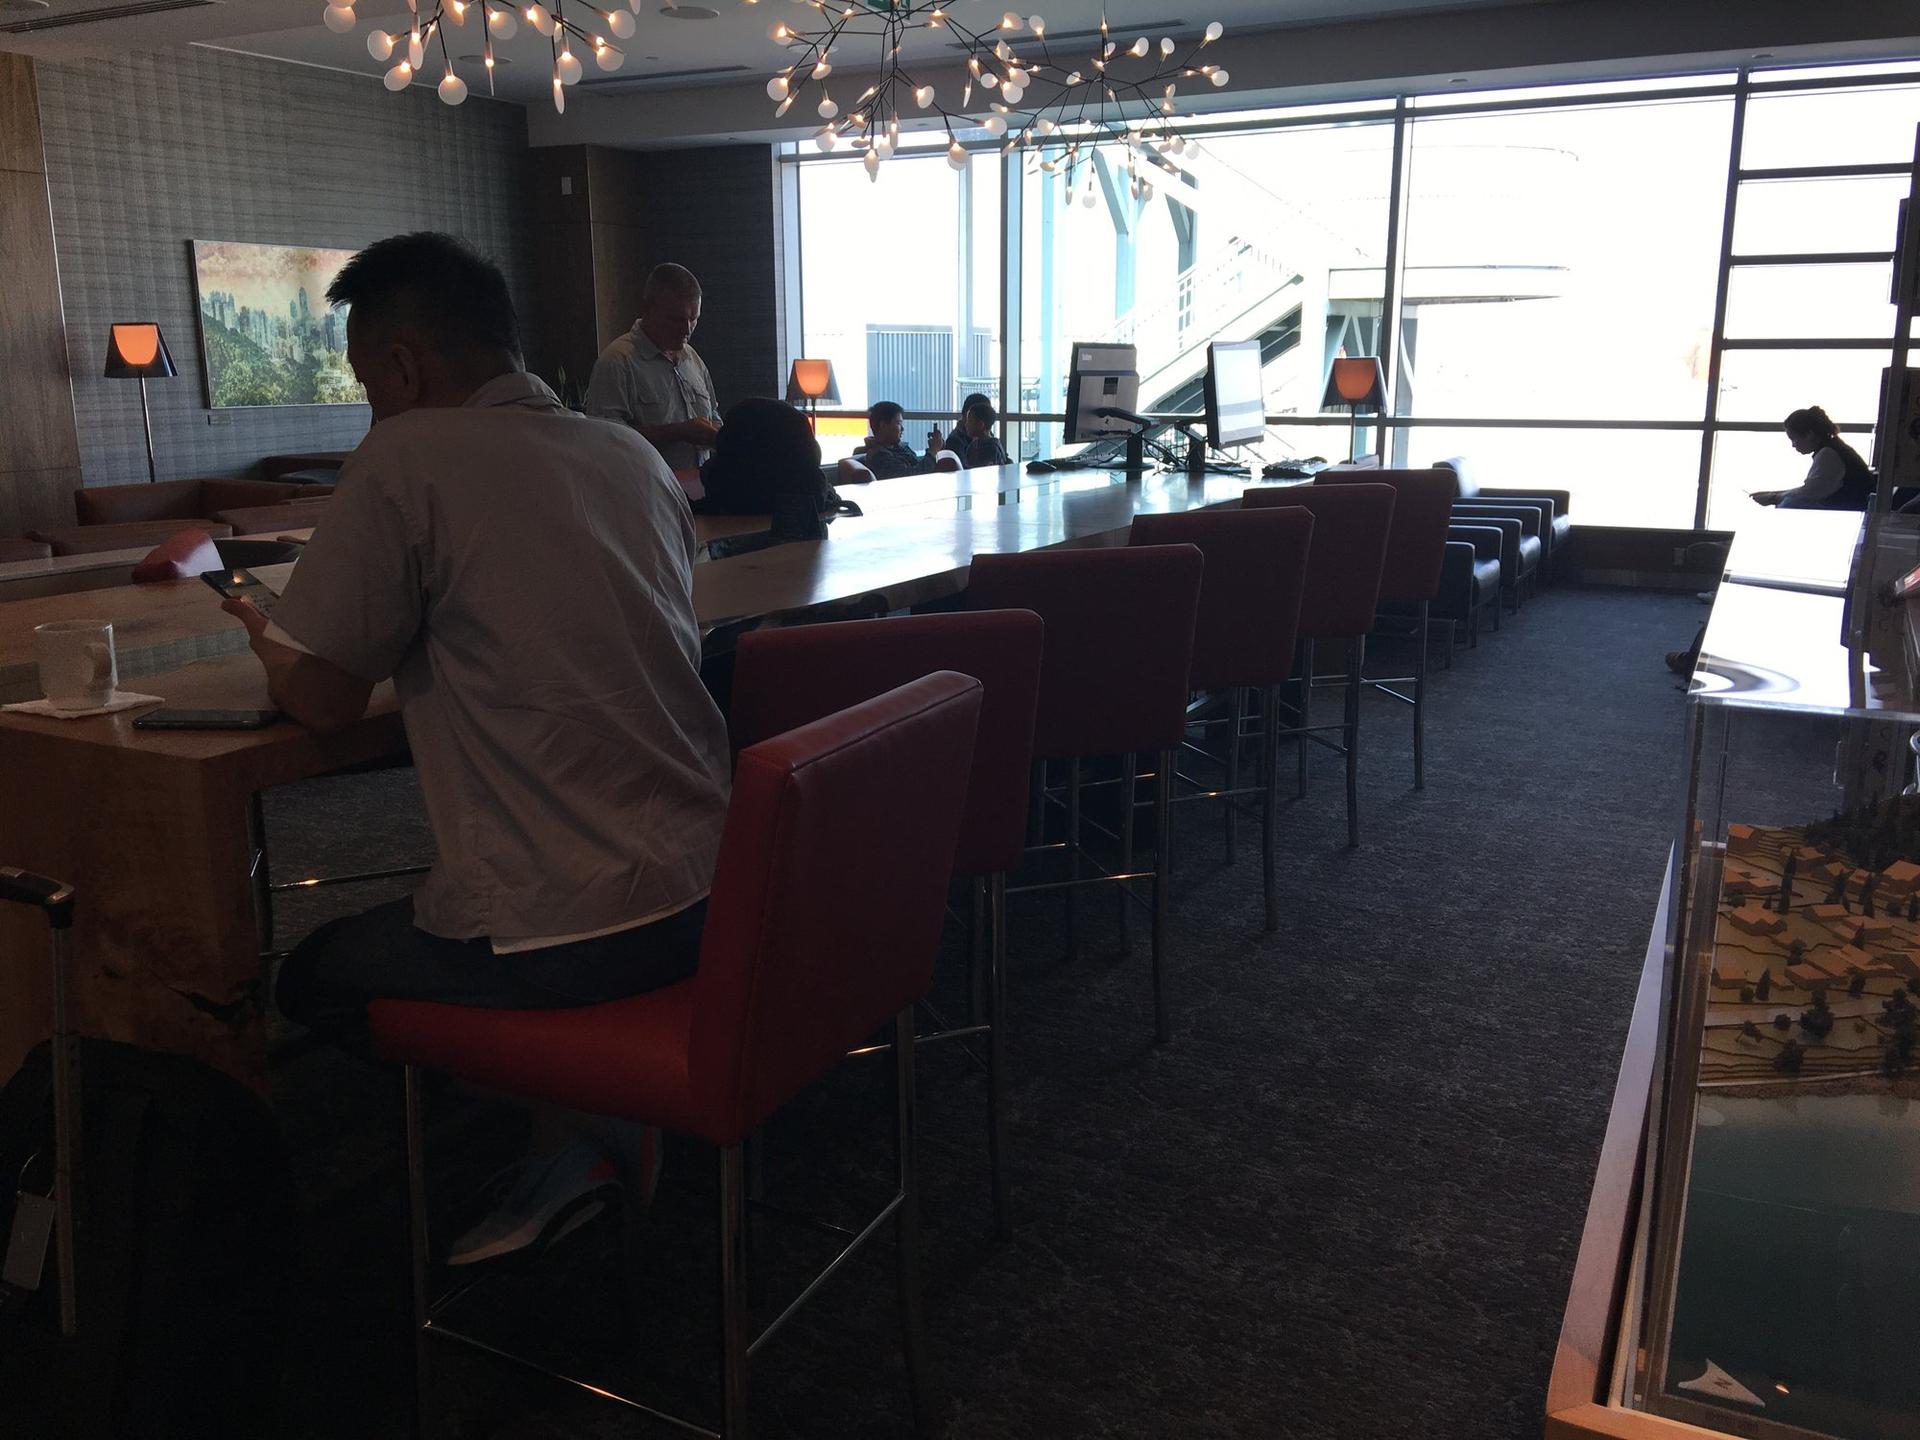 Air Canada Maple Leaf Lounge image 7 of 12